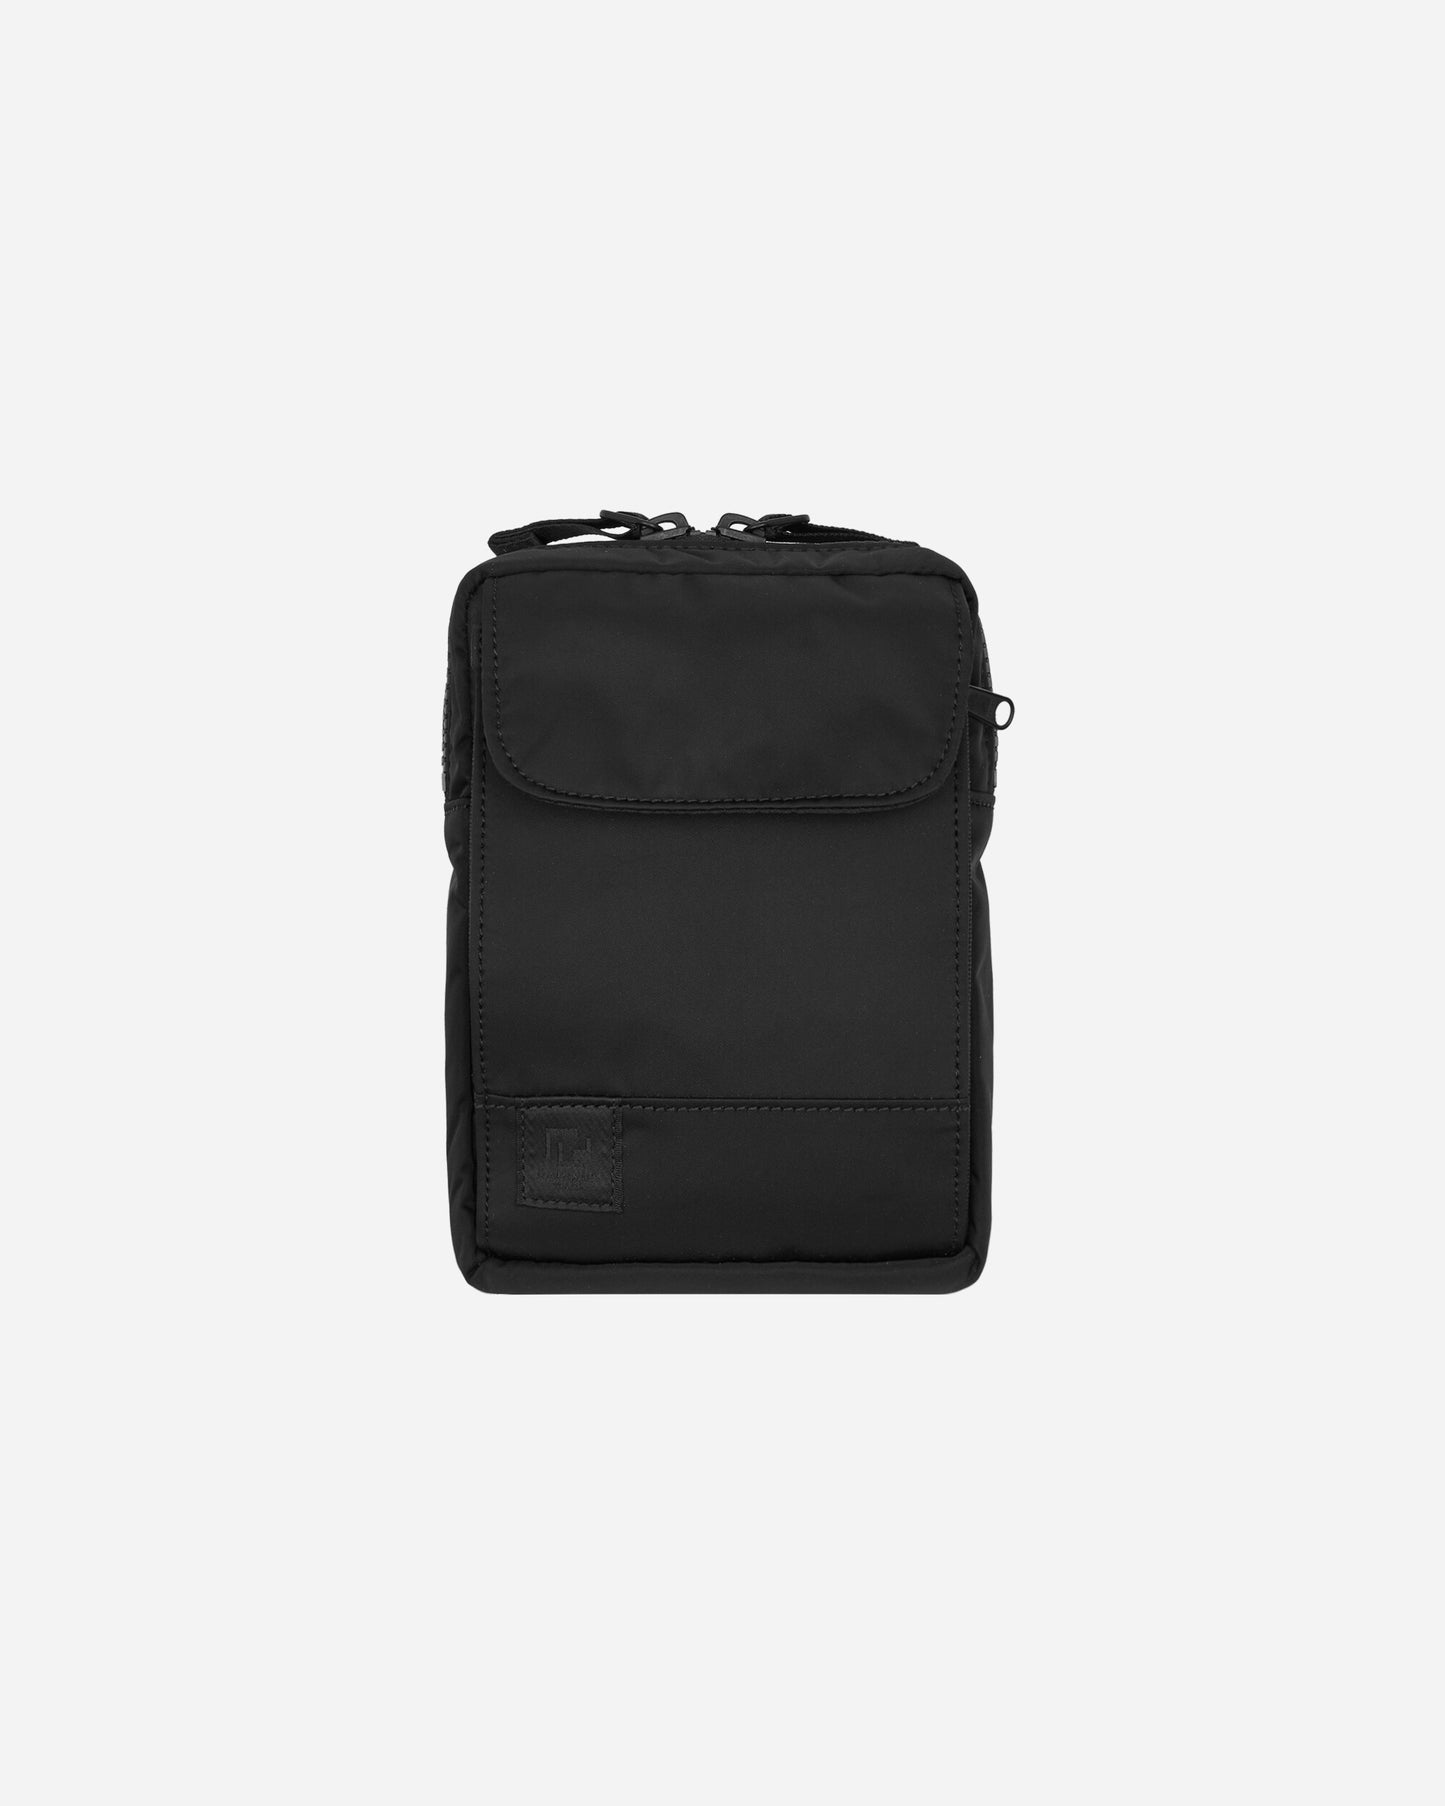 Ramidus Wallet Pouch Black Bags and Backpacks Pouches B011086 1